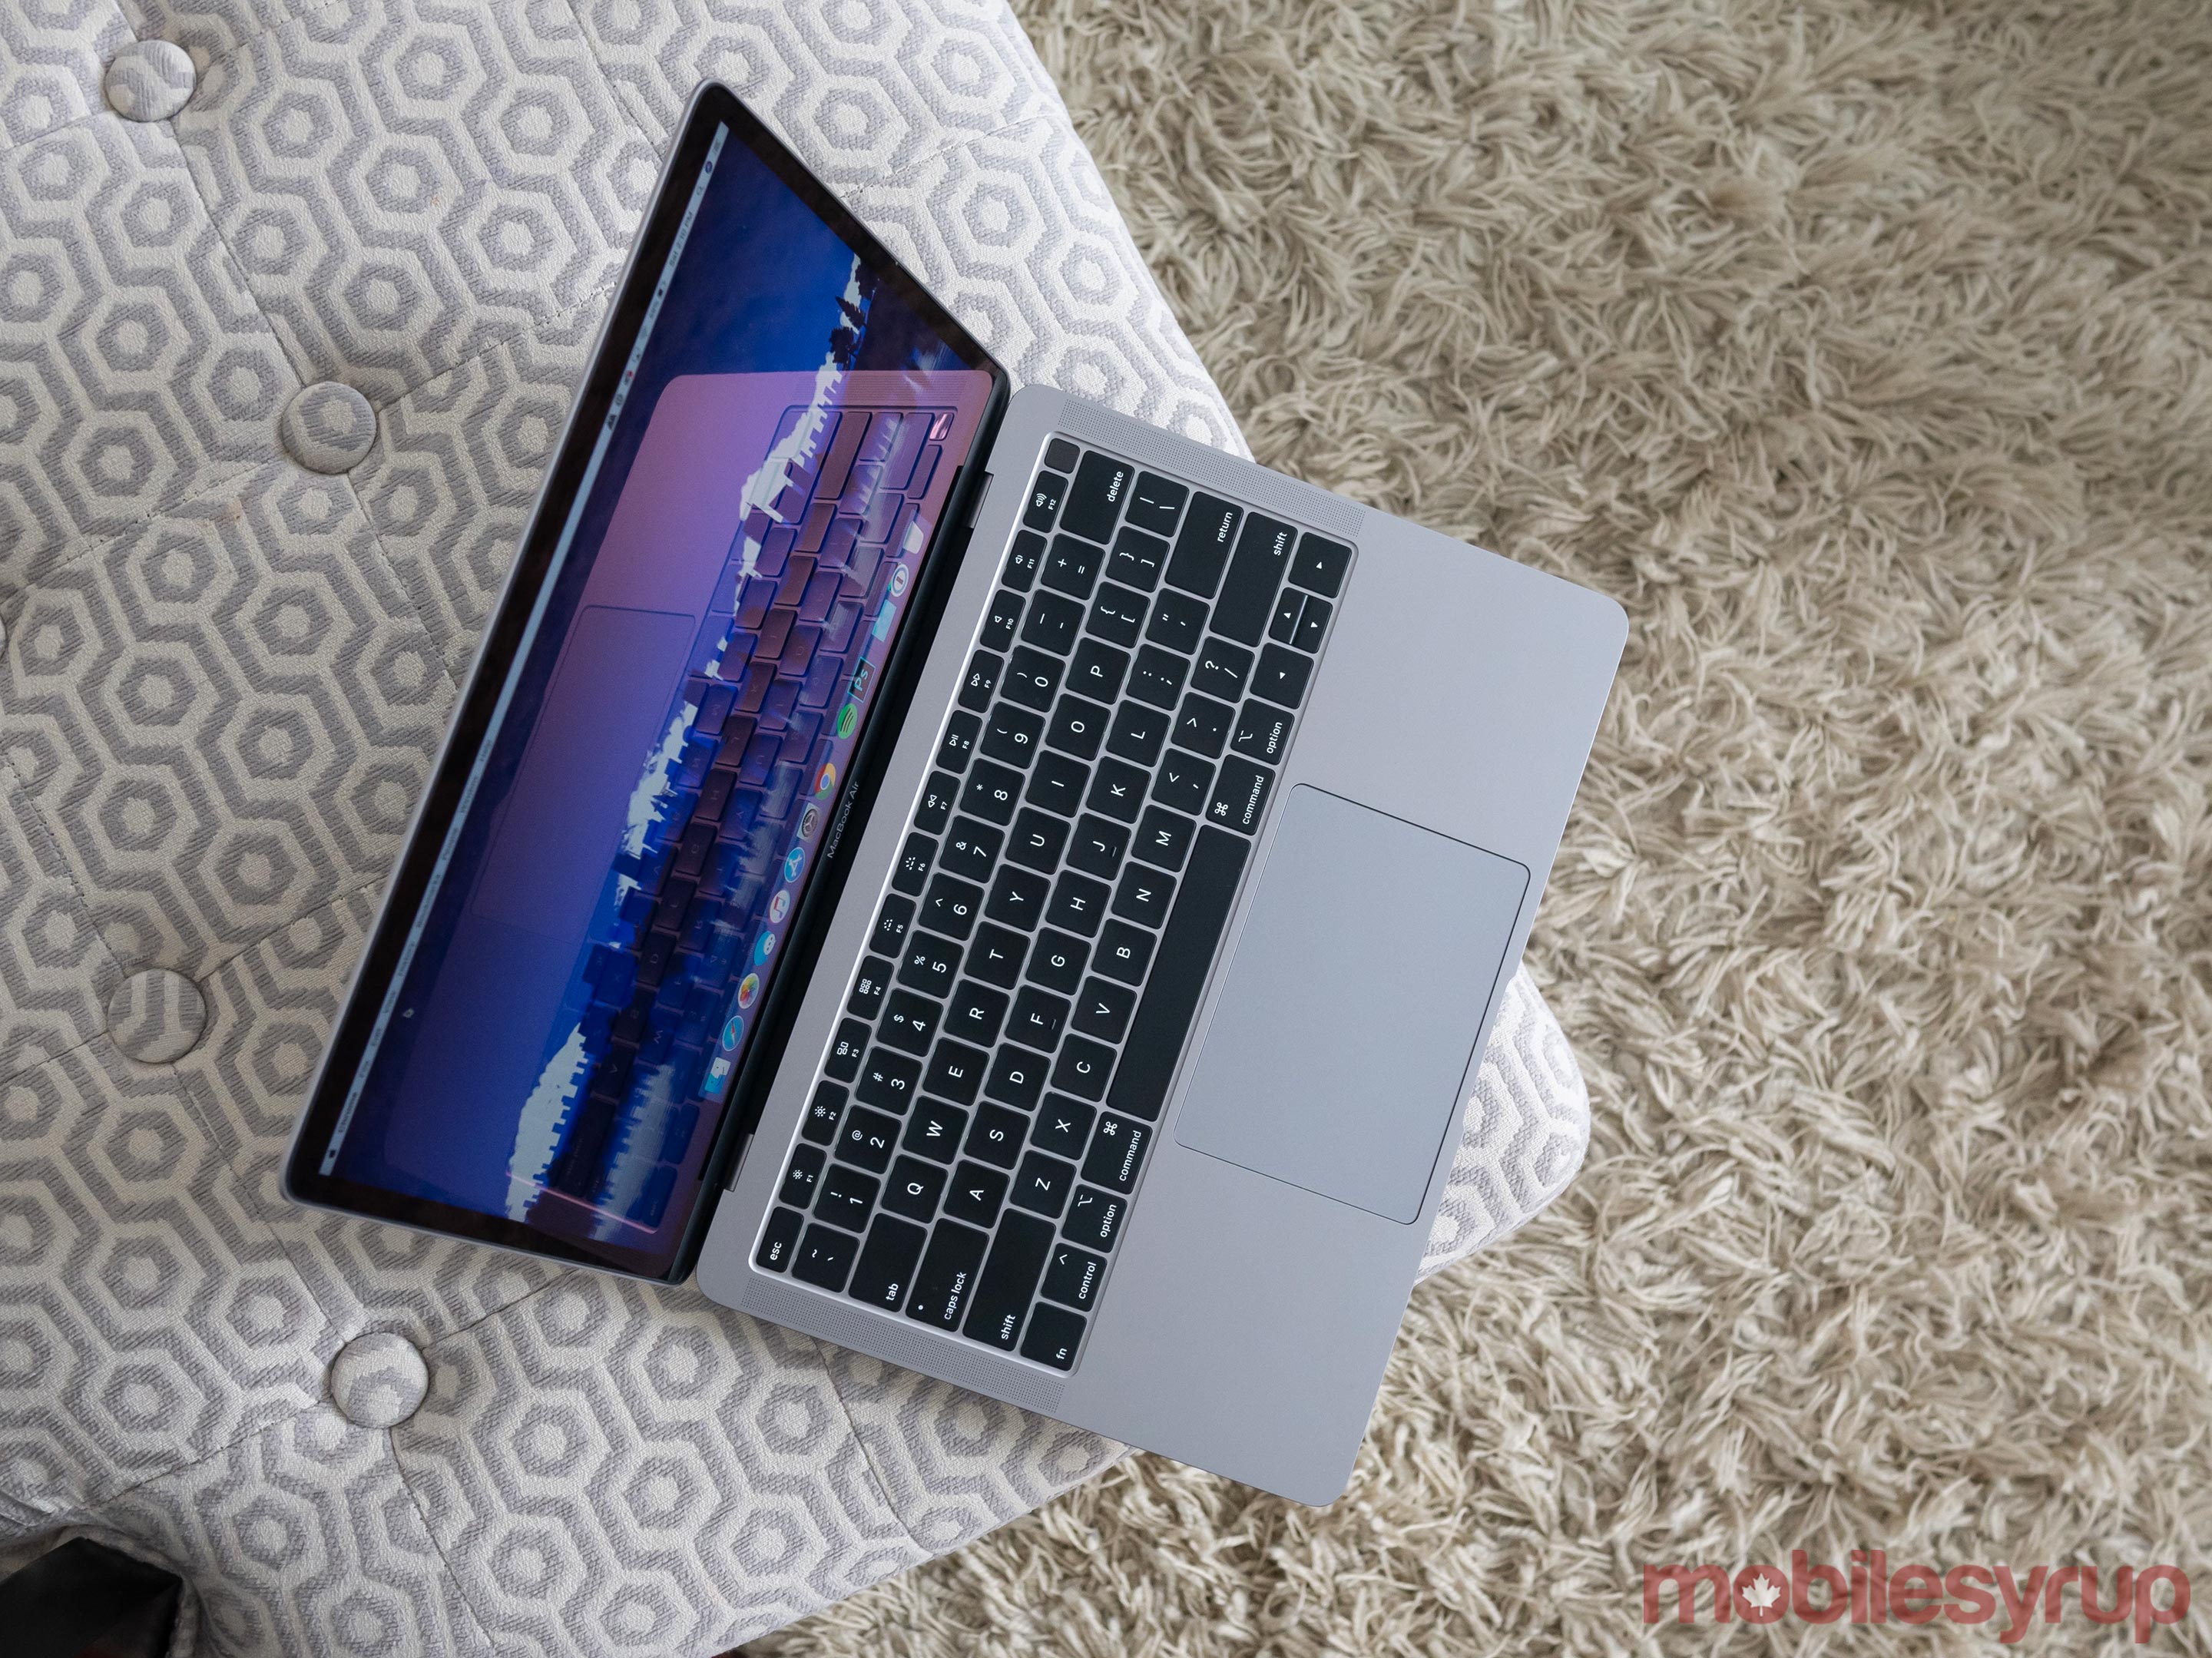 MacBook Air (2018) Review: An almost worthy successor